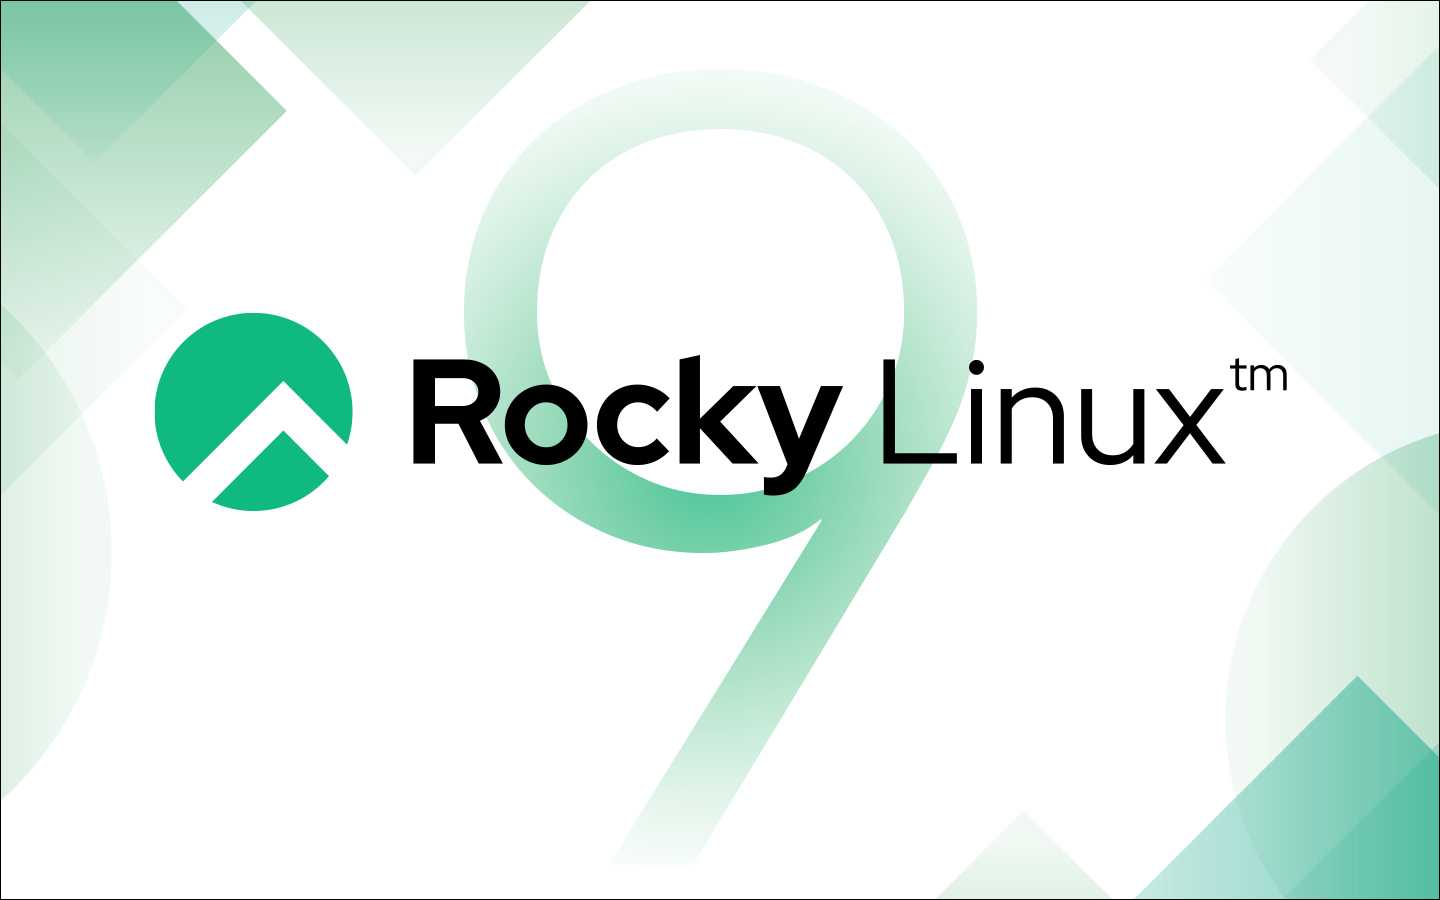 Rocky Linux 9: What’s New?